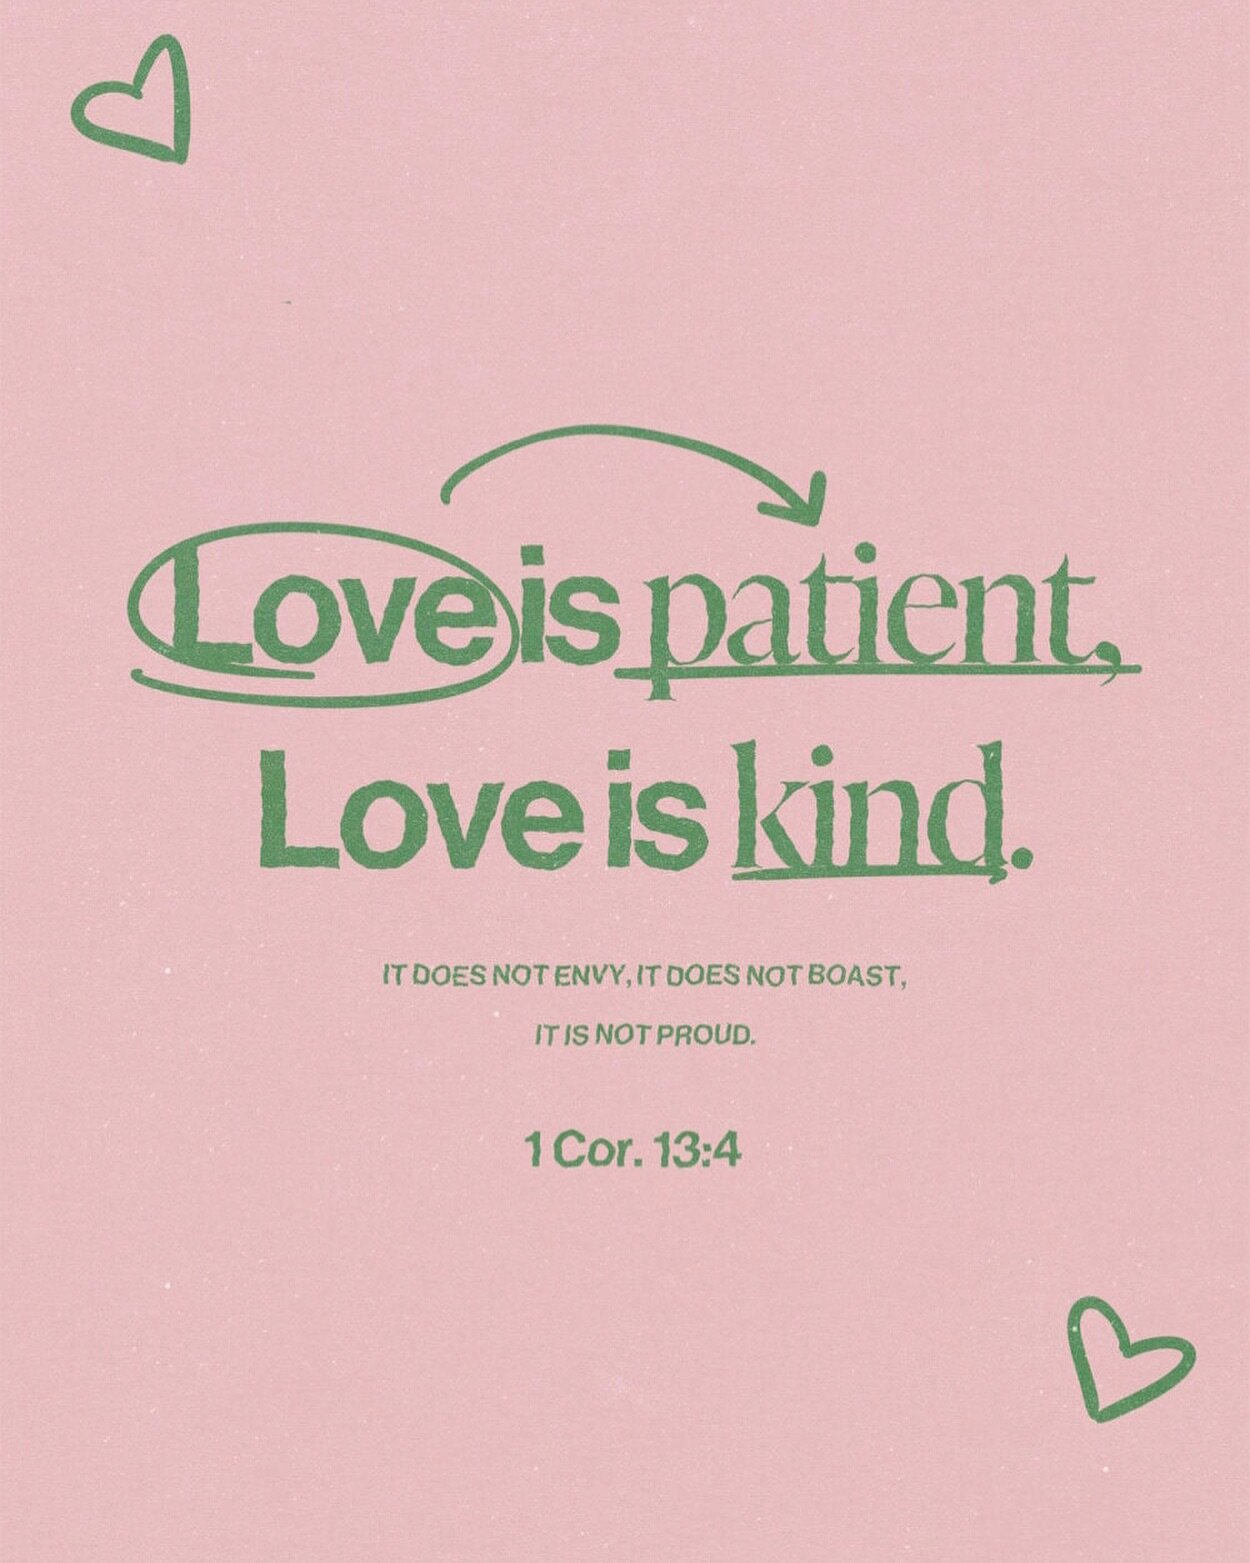 Love is patient, enduring with grace and understanding. It waits without complaint or haste, showing kindness and empathy. 

This Valentine&rsquo;s Day, may we embody this profound love in all our relationships. 💖 #Love #Patience #ValentinesDay